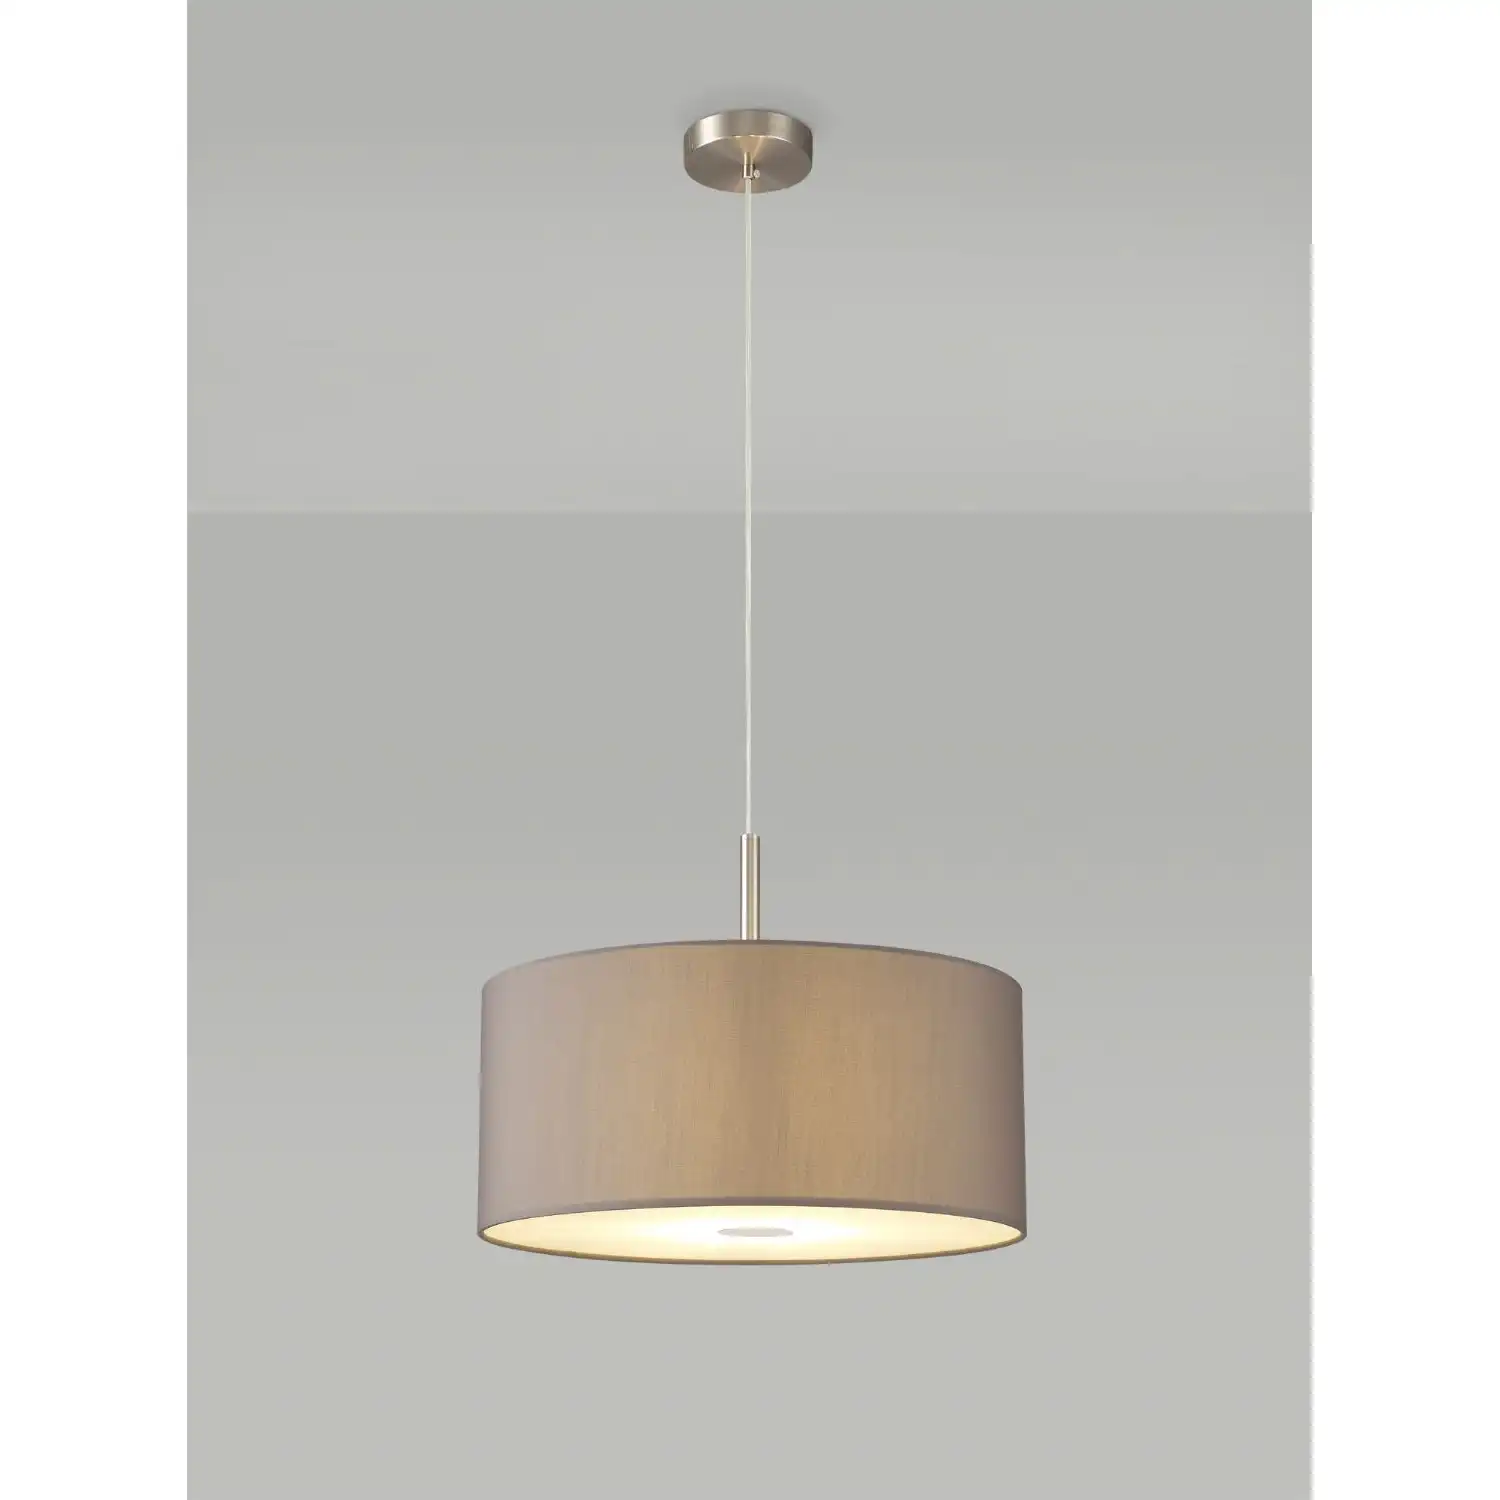 Baymont Satin Nickel 3m 3 Light E27 Single Pendant c w 400mm Faux Silk Shade, Grey White Laminate And 400mm Frosted SN Acrylic Diffuser